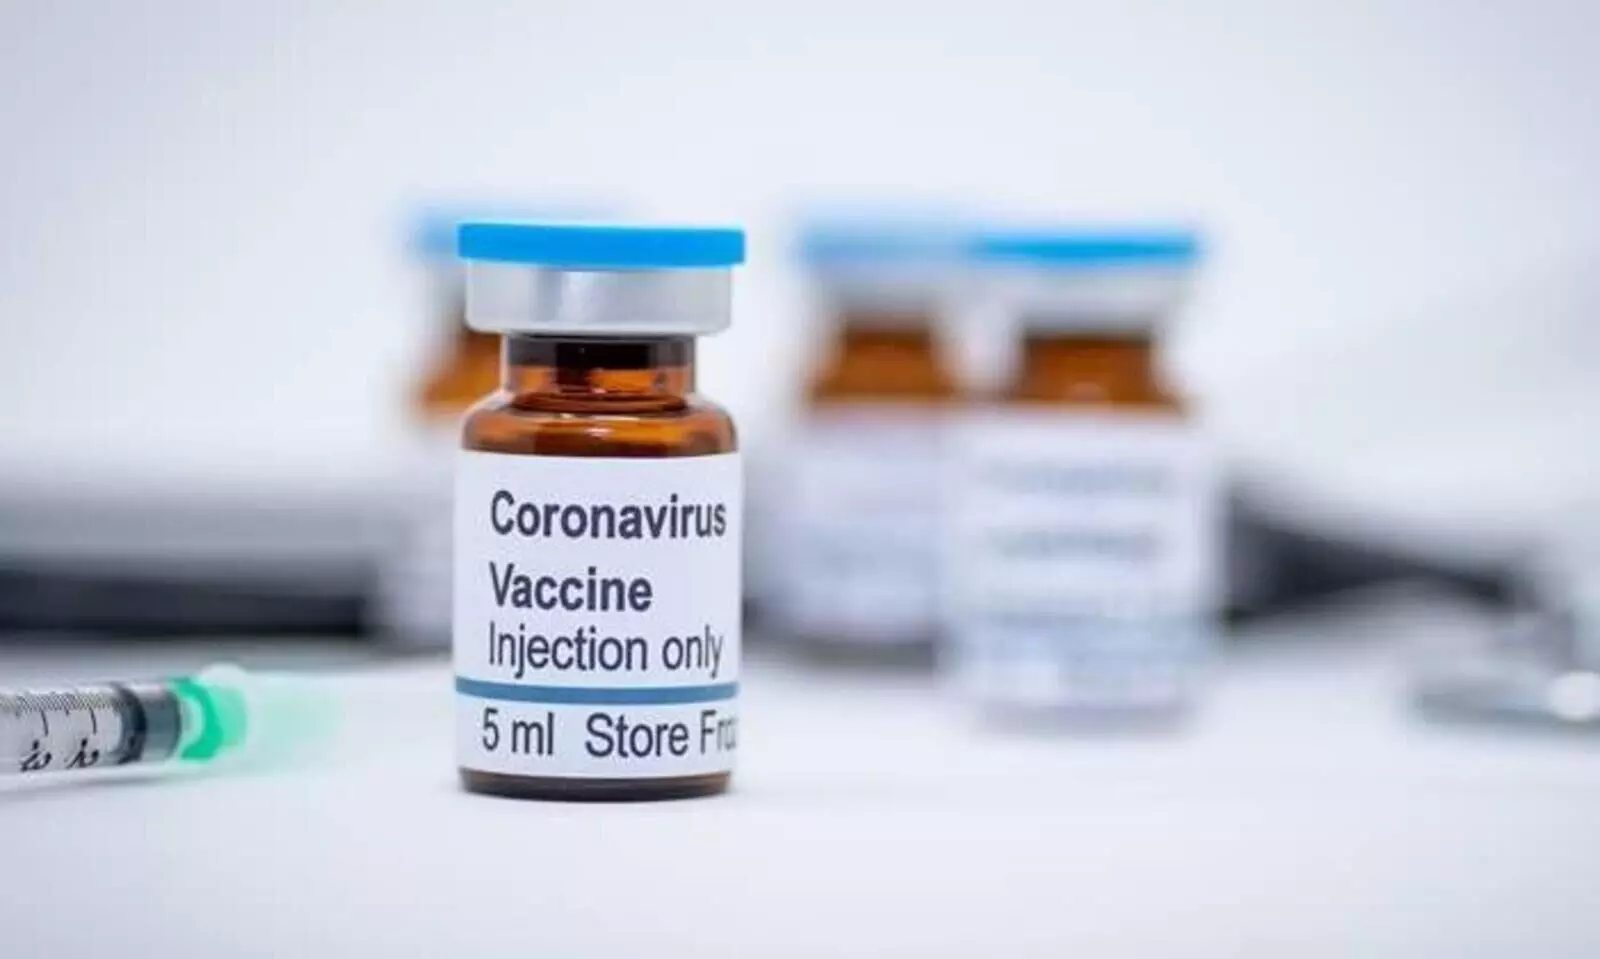 Rich countries hoarding doses of Covid vaccines, alleges campaigning body